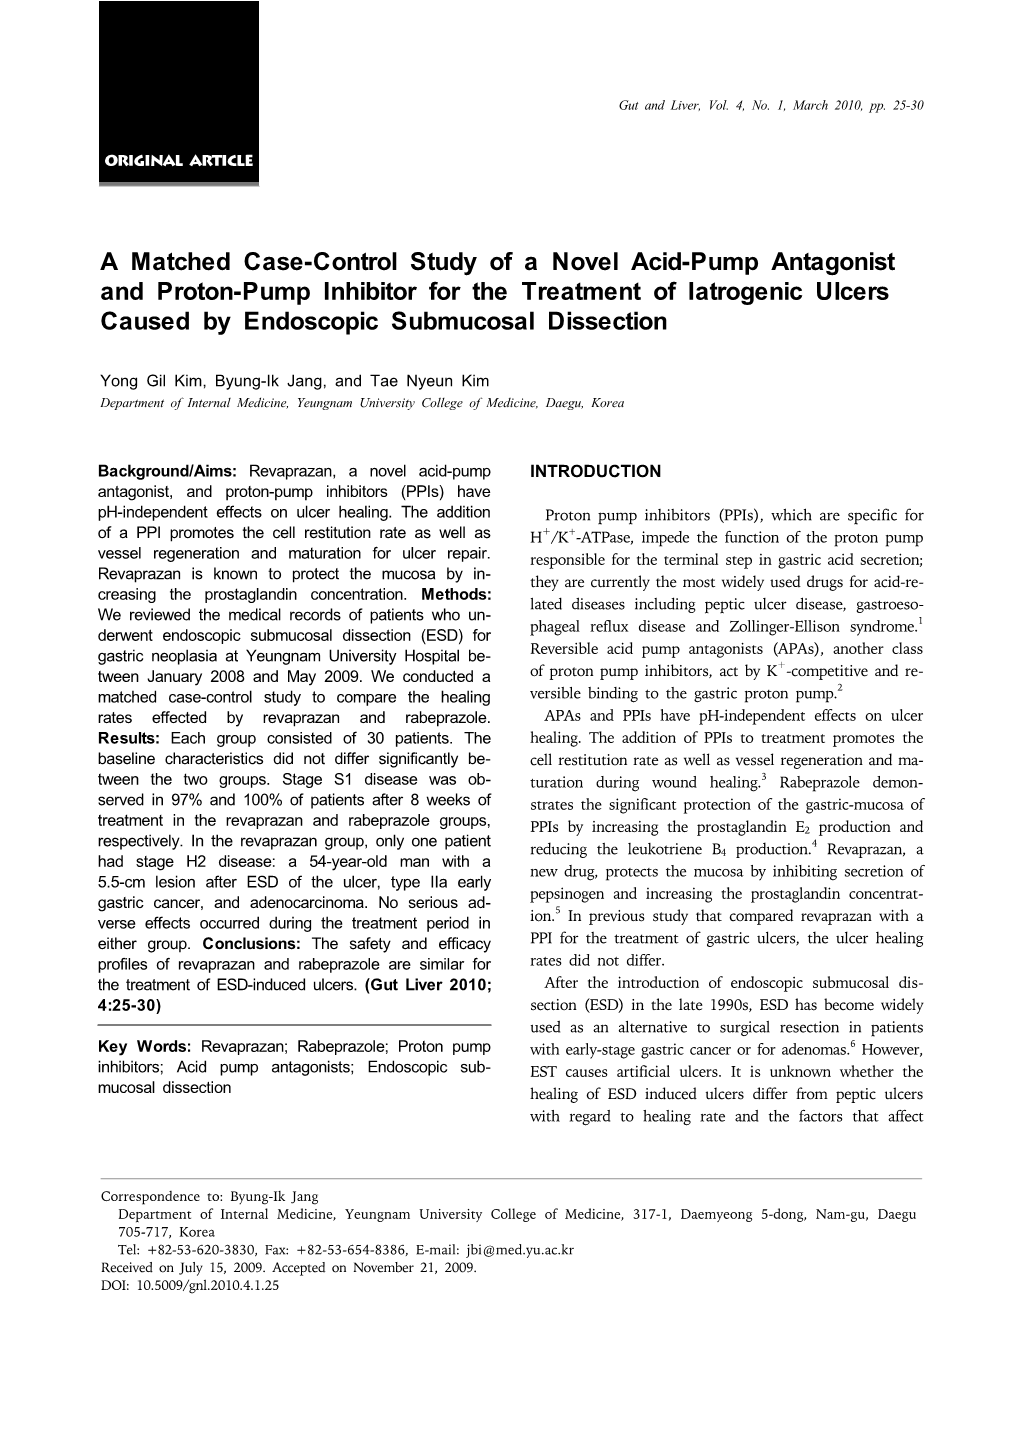 A Matched Case-Control Study of a Novel Acid-Pump Antagonist and Proton-Pump Inhibitor for the Treatment of Iatrogenic Ulcers Ca